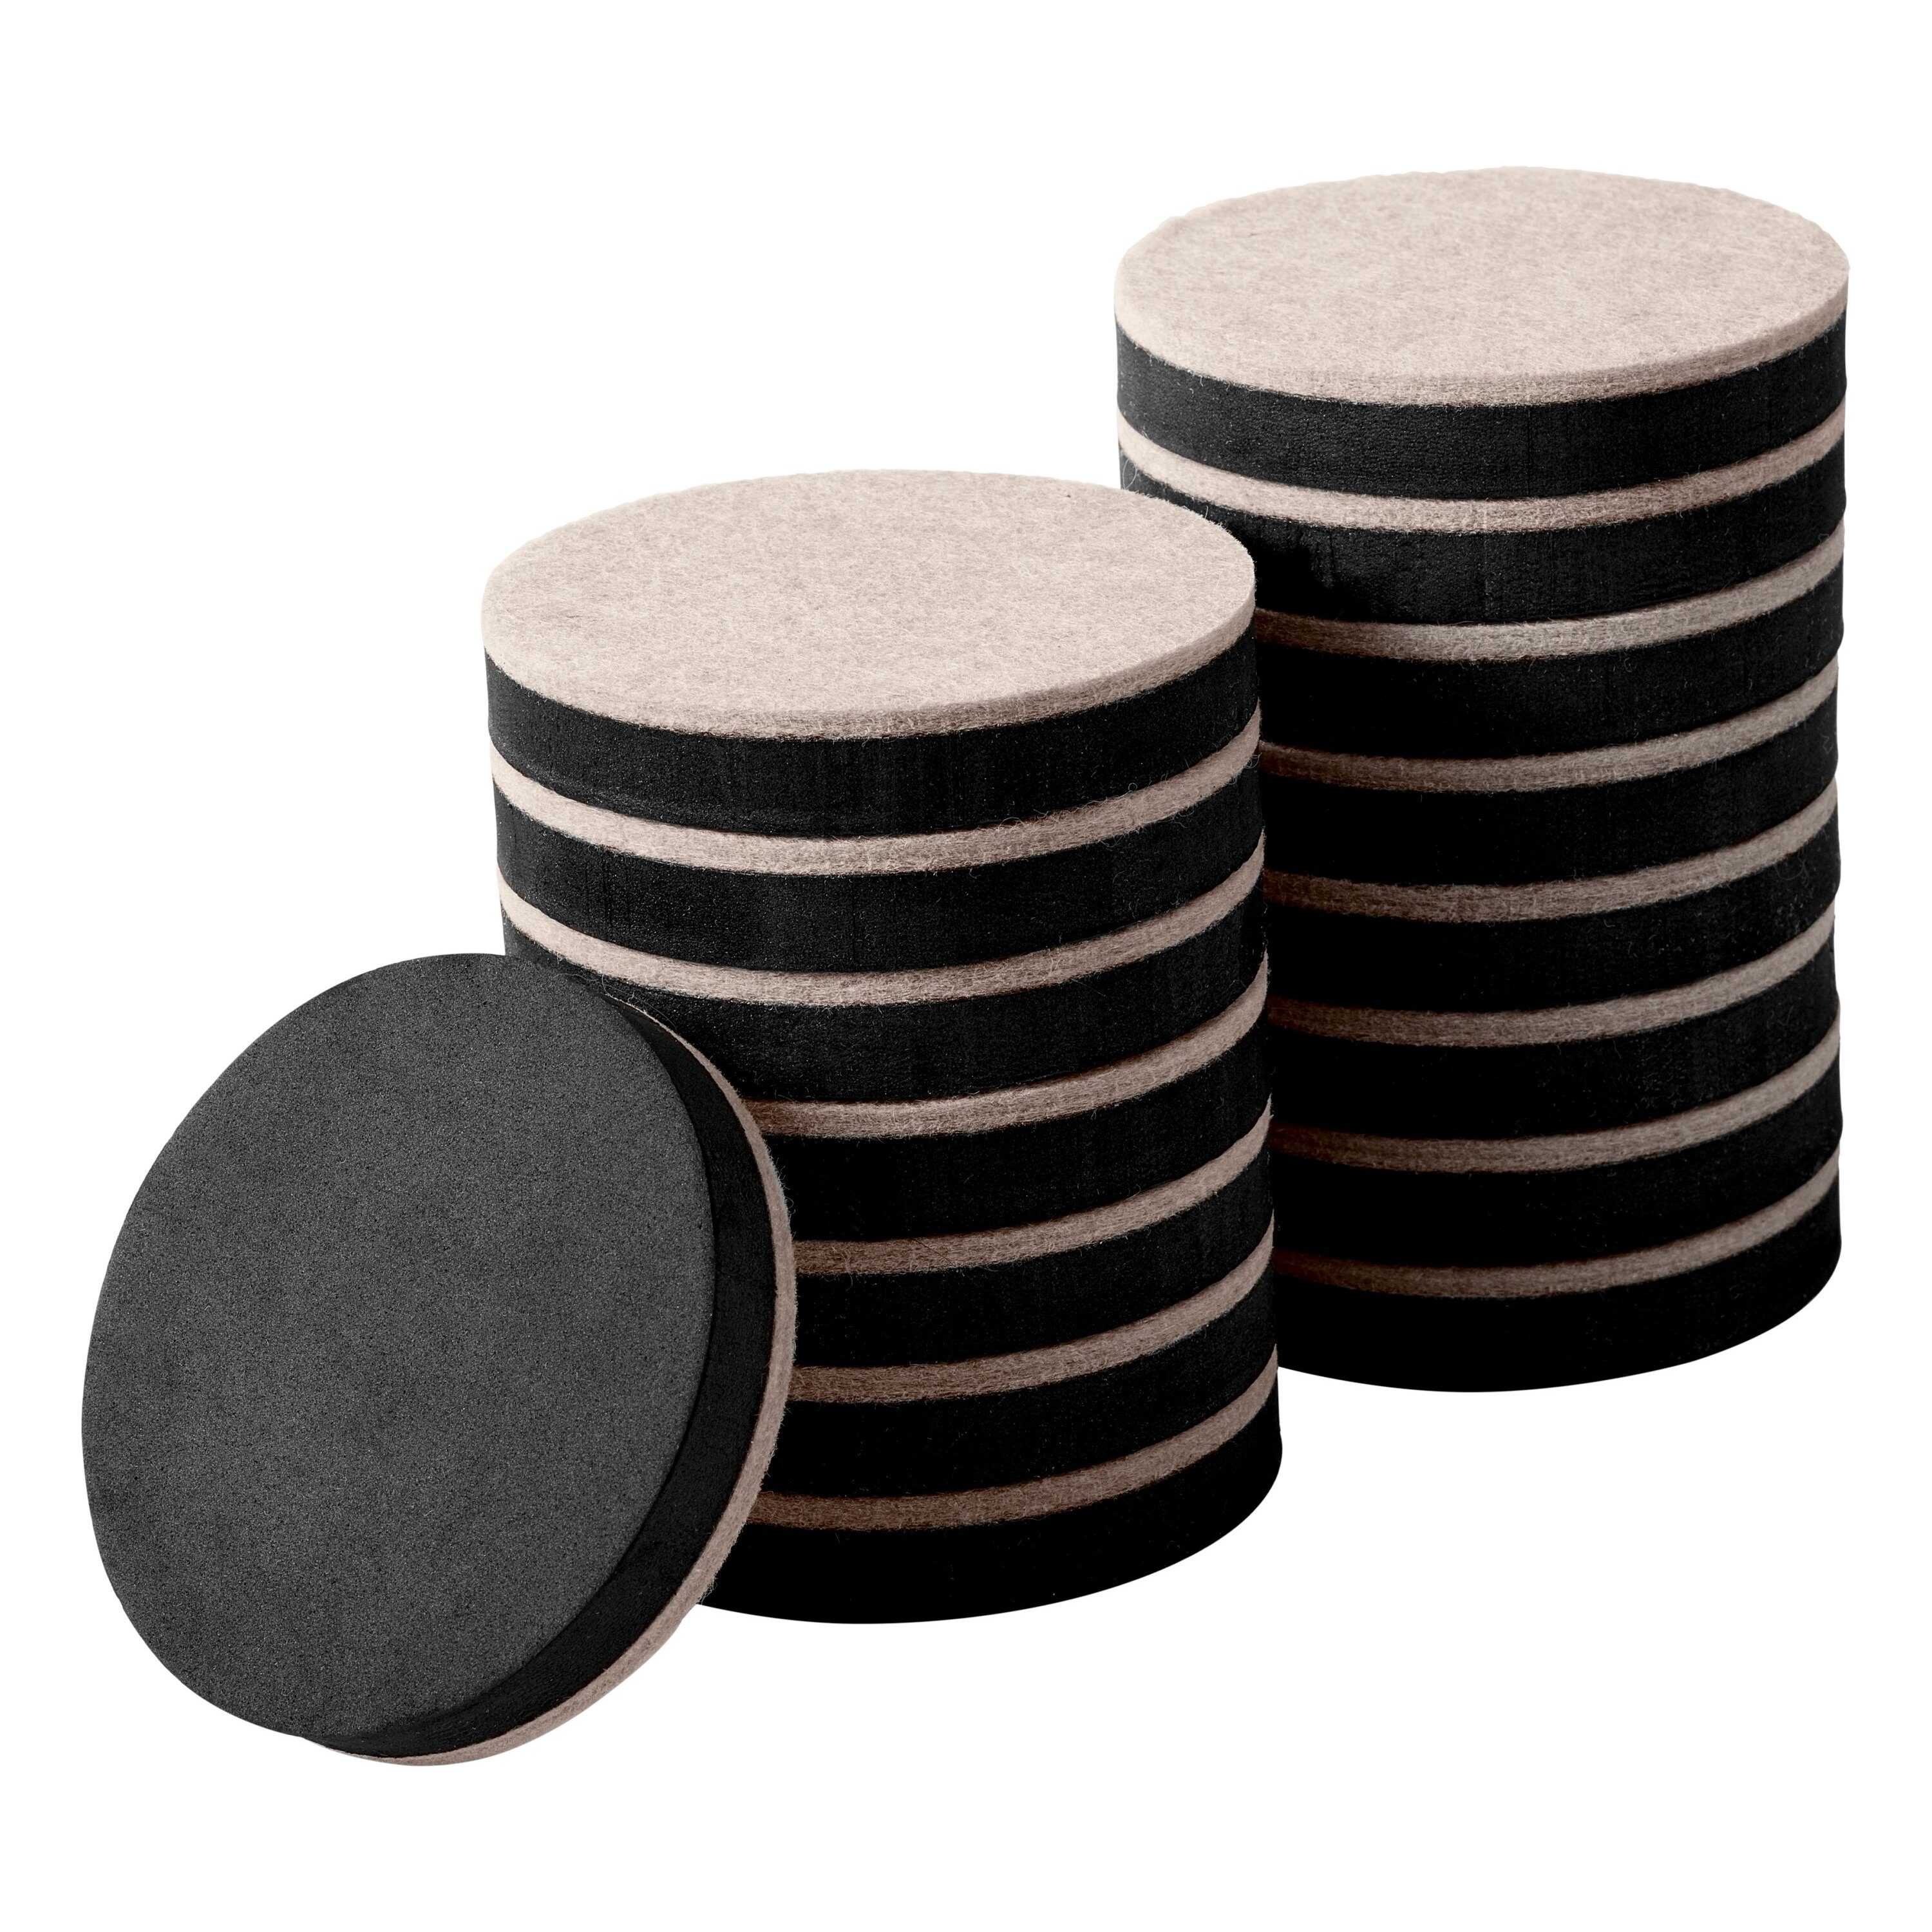  3.5 Felt Furniture Movers Sliders for Hardwood & Vinyl Floors,  16 PCS Round Reusable Felt Furniture Moving Pads, Sliders for Moving Heavy  Sofa Table Couch Cabinet, Glides Easily and Quickly (Beige) 